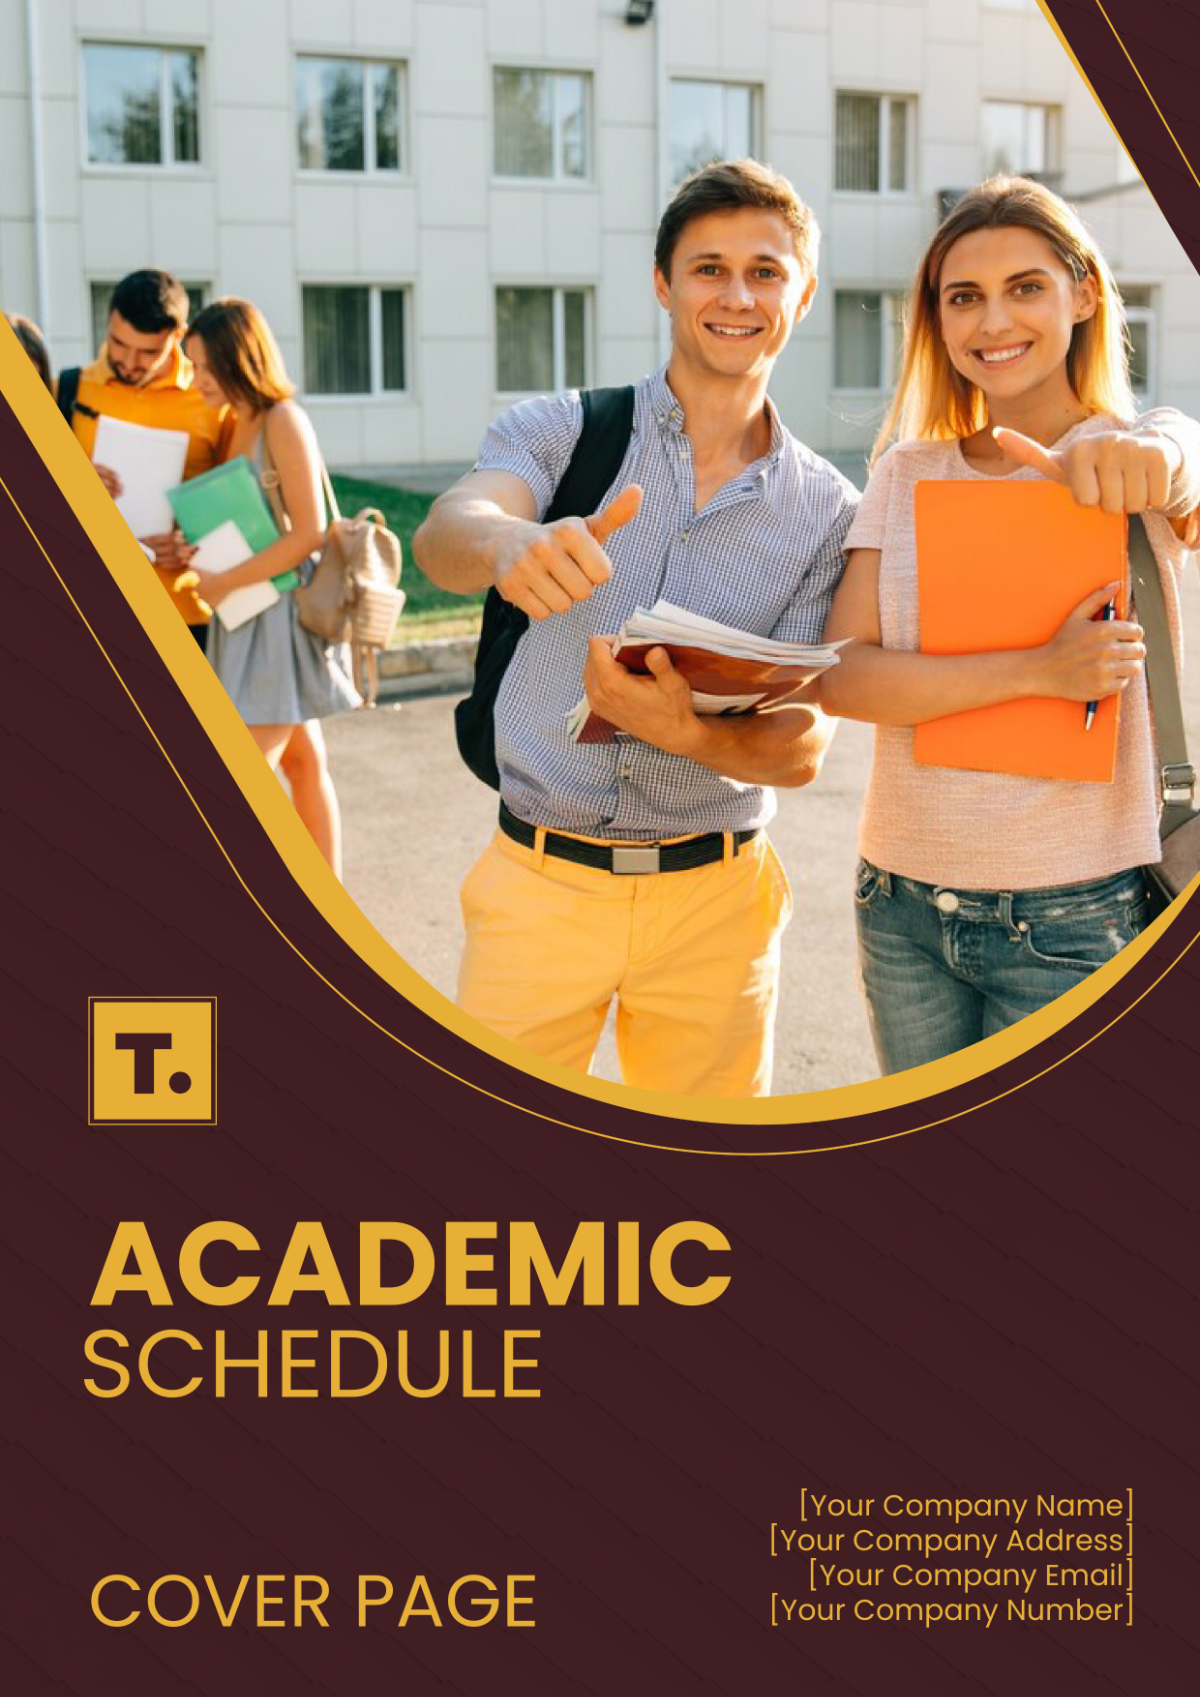 Academic Schedule Cover Page